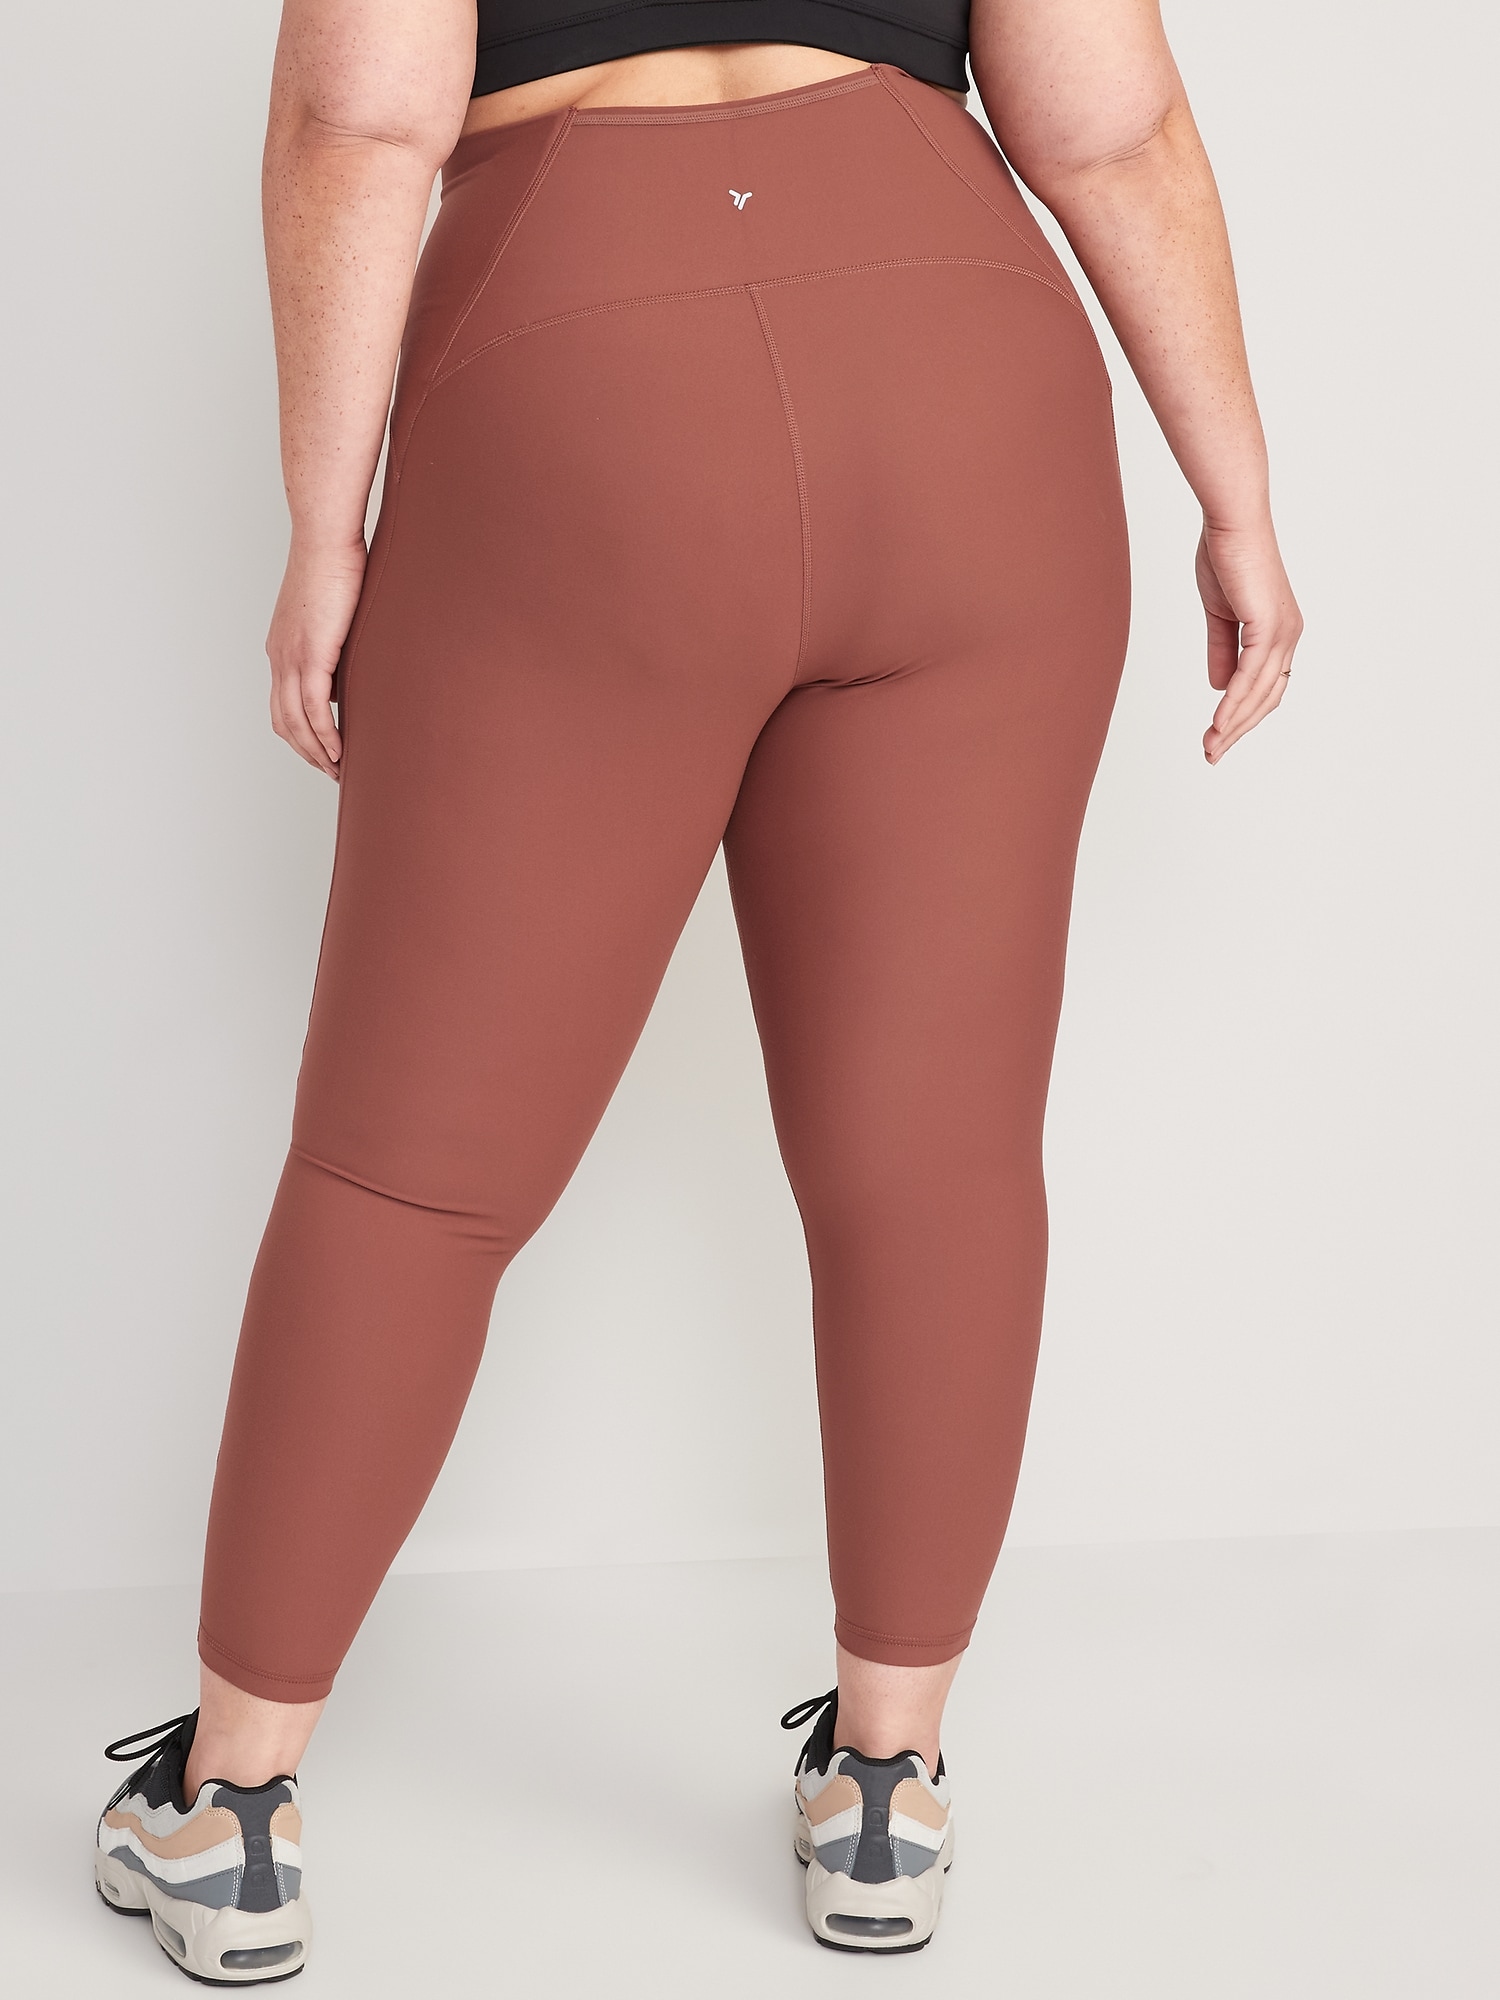 COPY - 🧘‍♀️NWT Old Navy Women's Active leggings Size Small.🧘‍♀️